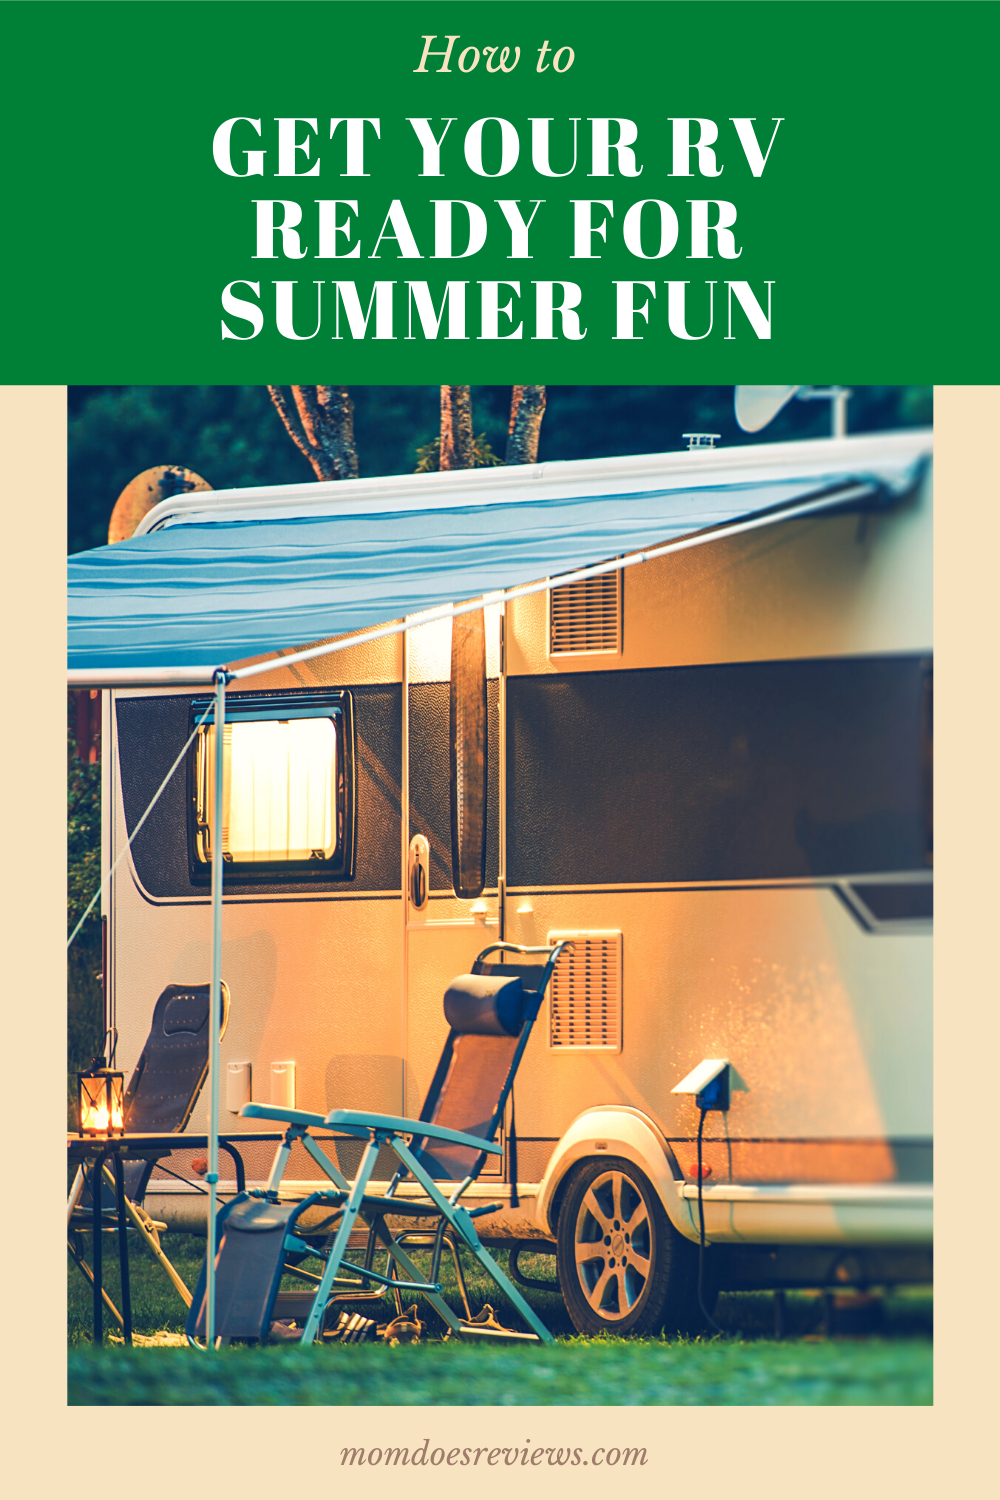 How to Repair Your RV for Family Fun This Summer